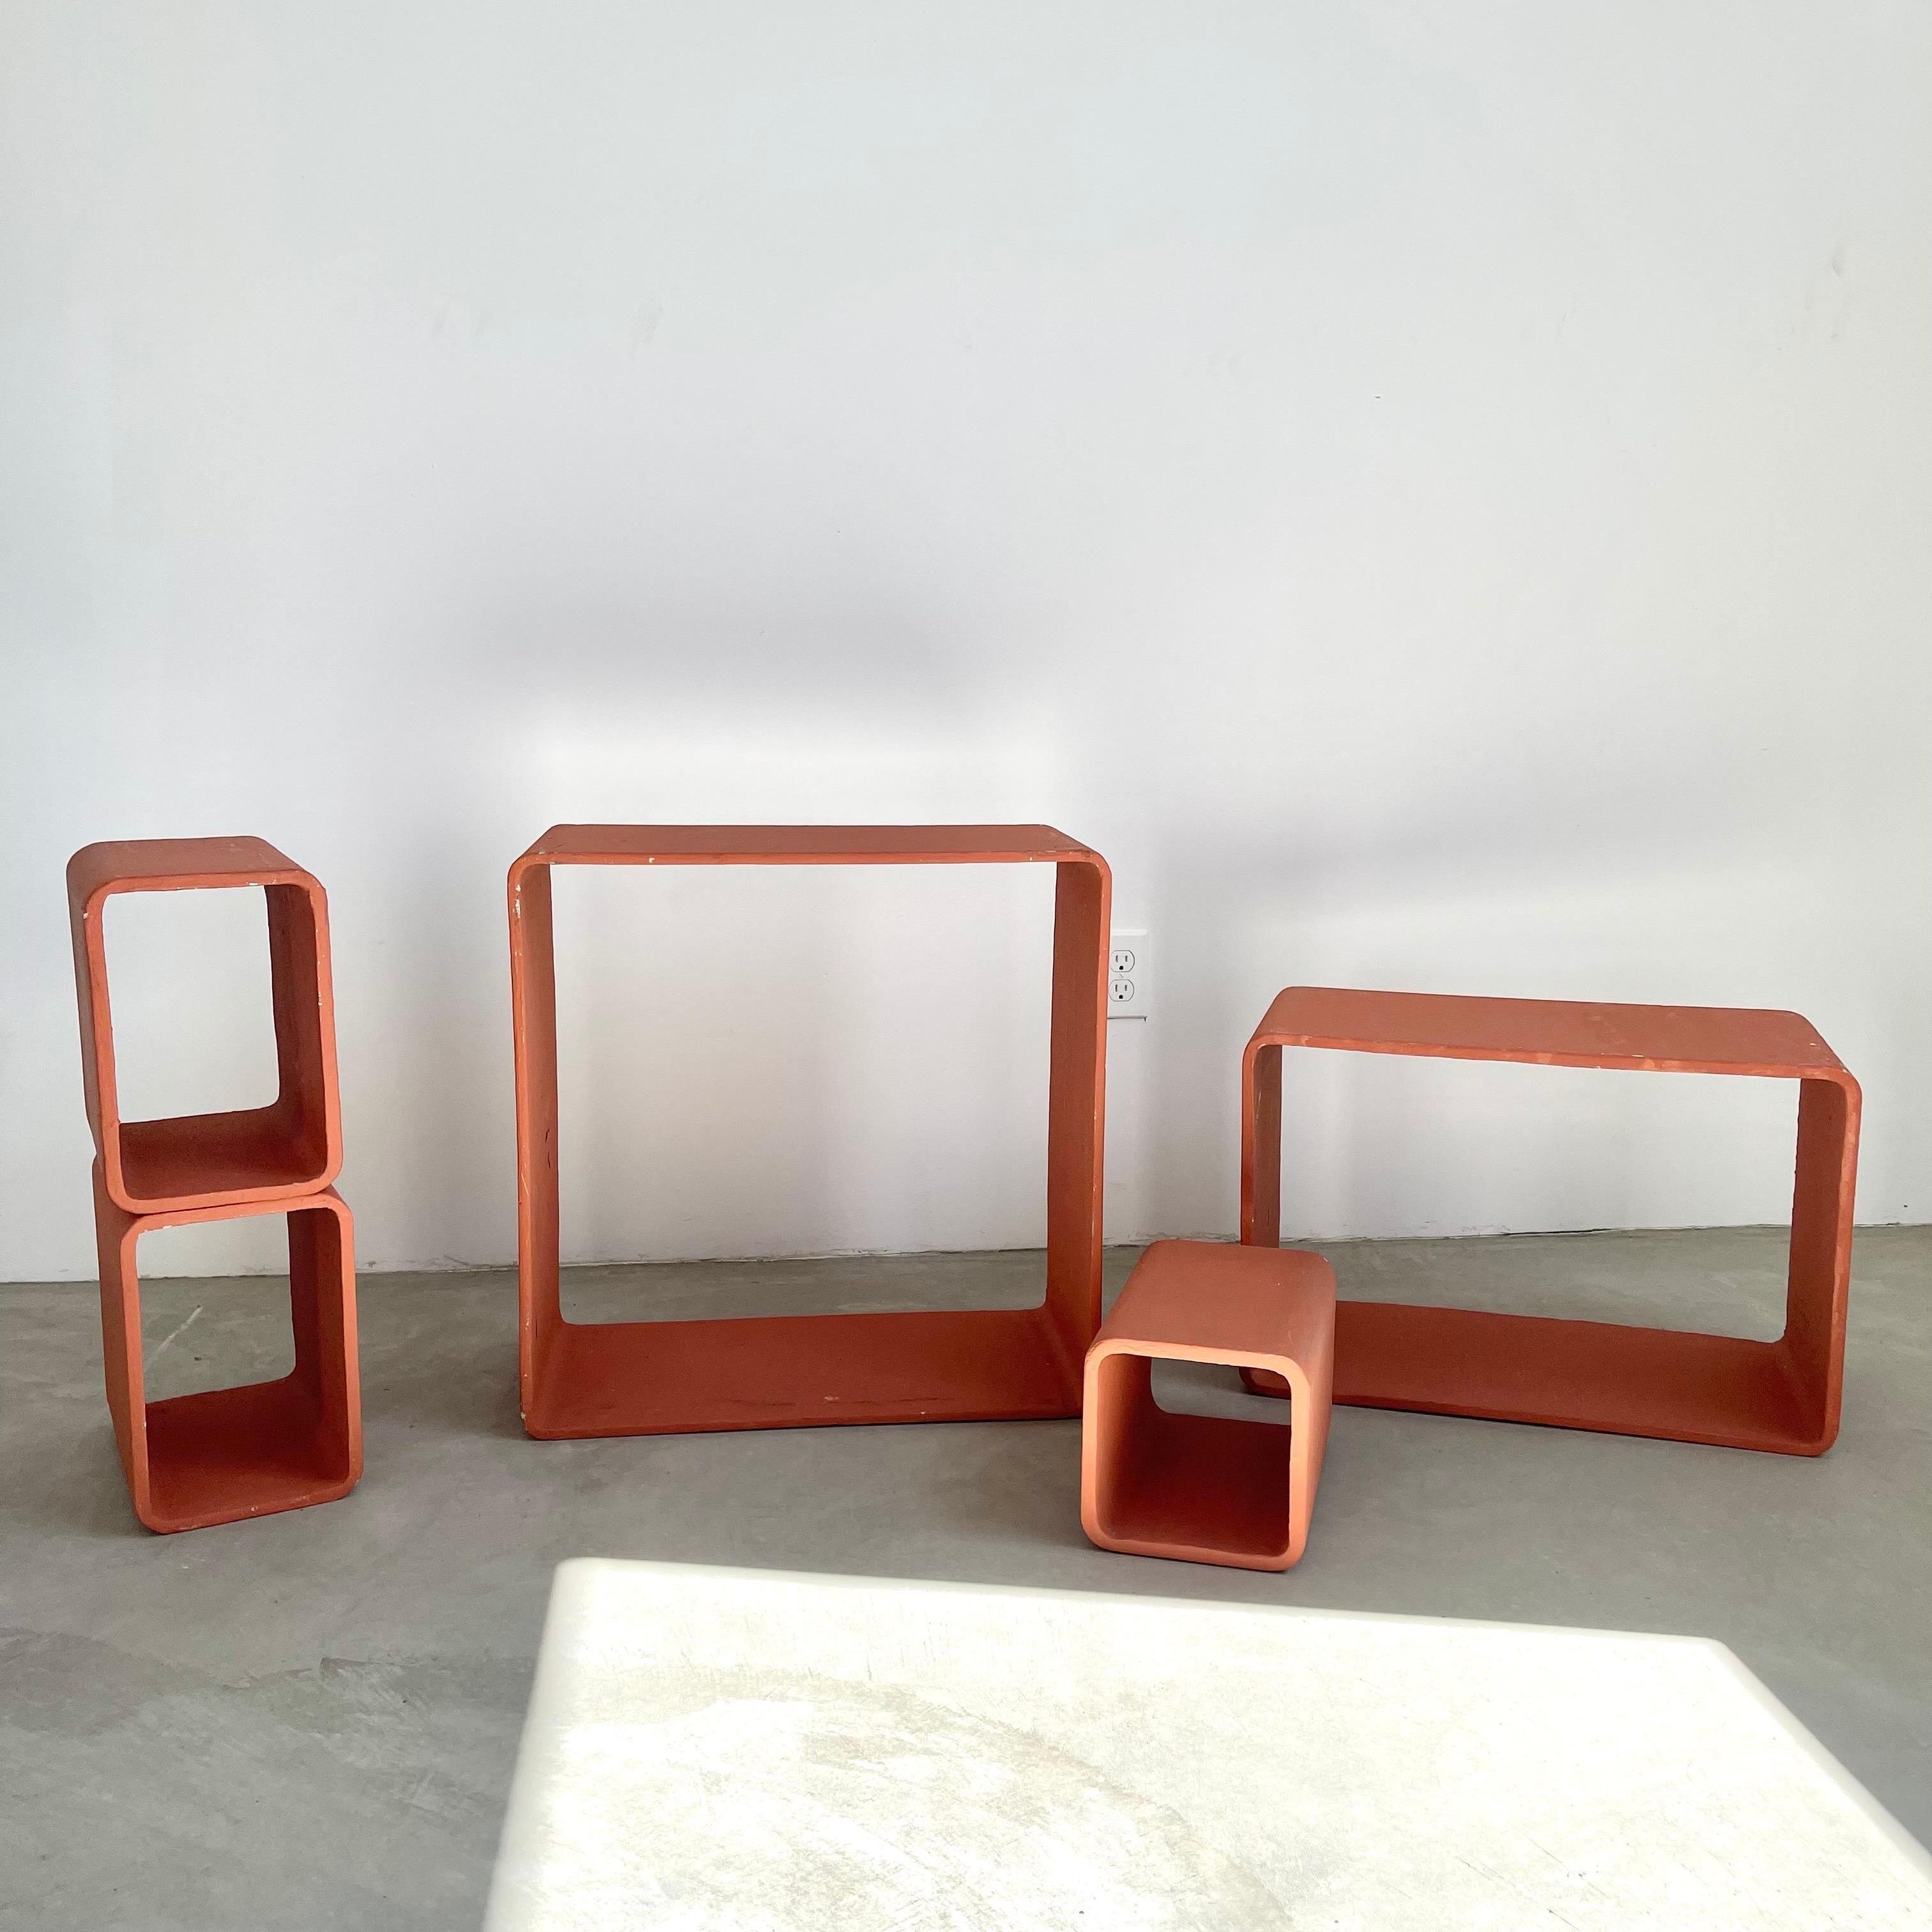 Unique set of painted concrete cubes in a pastel orange by Swiss architect and designer Willy Guhl. Handmade in the early 1960s in Switzerland. Produced by Eternit. Set of 5 cubes in great original condition. Can be arranged in a multitude of ways.